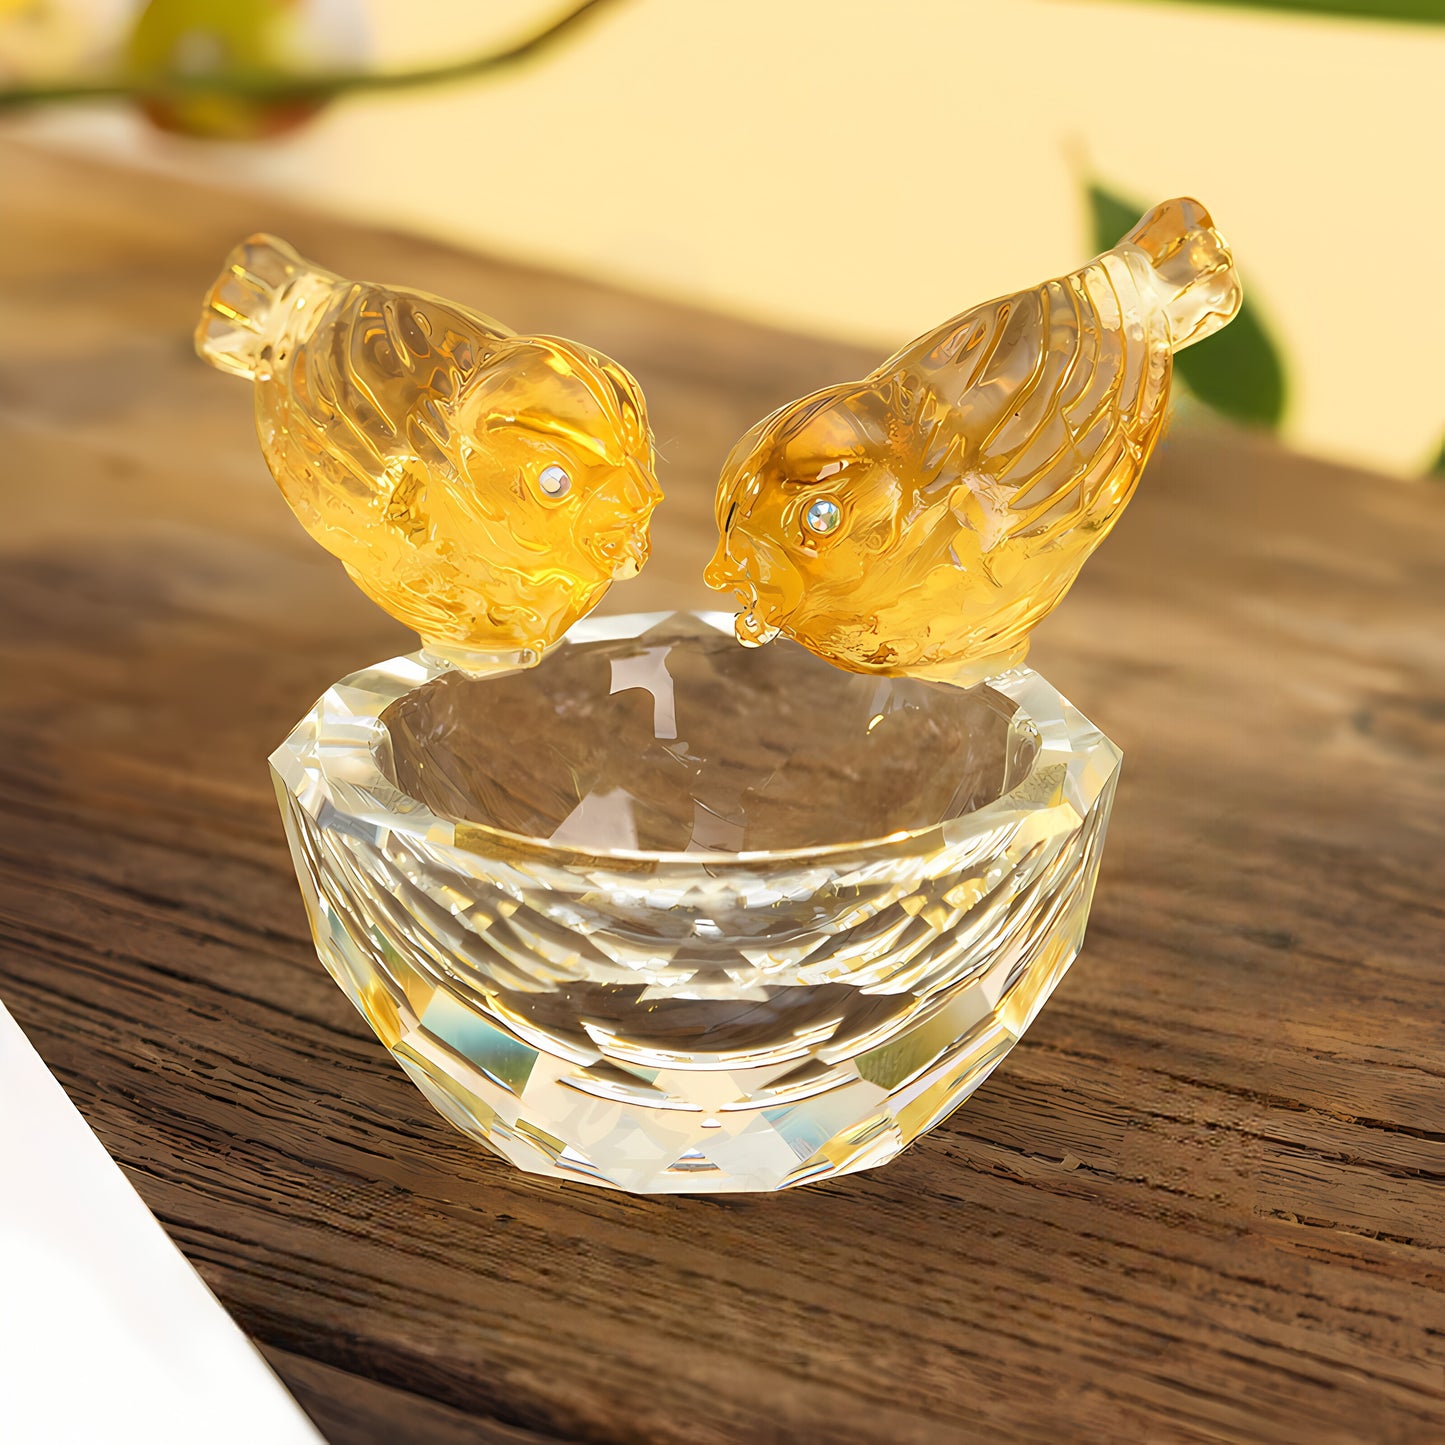 Crystal Bird's Nest Figurine, 2.56 x 2.17 Inches, Collectible Art Piece Bird Animal Statue, Suitable for Living Room Bedroom Office Decor, Mother's Day Gift, Ideal for Gifting Friends